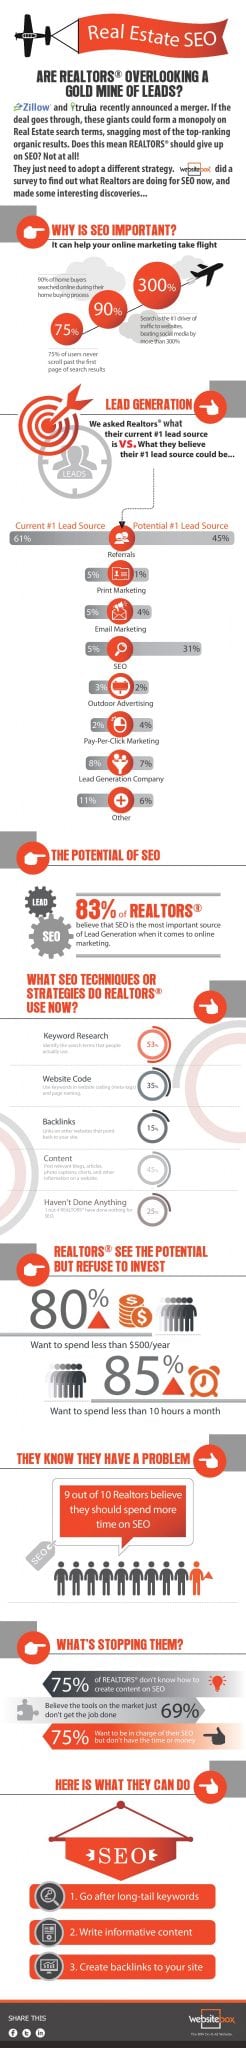 Infographic-SEO2 (4) (1)-page-001